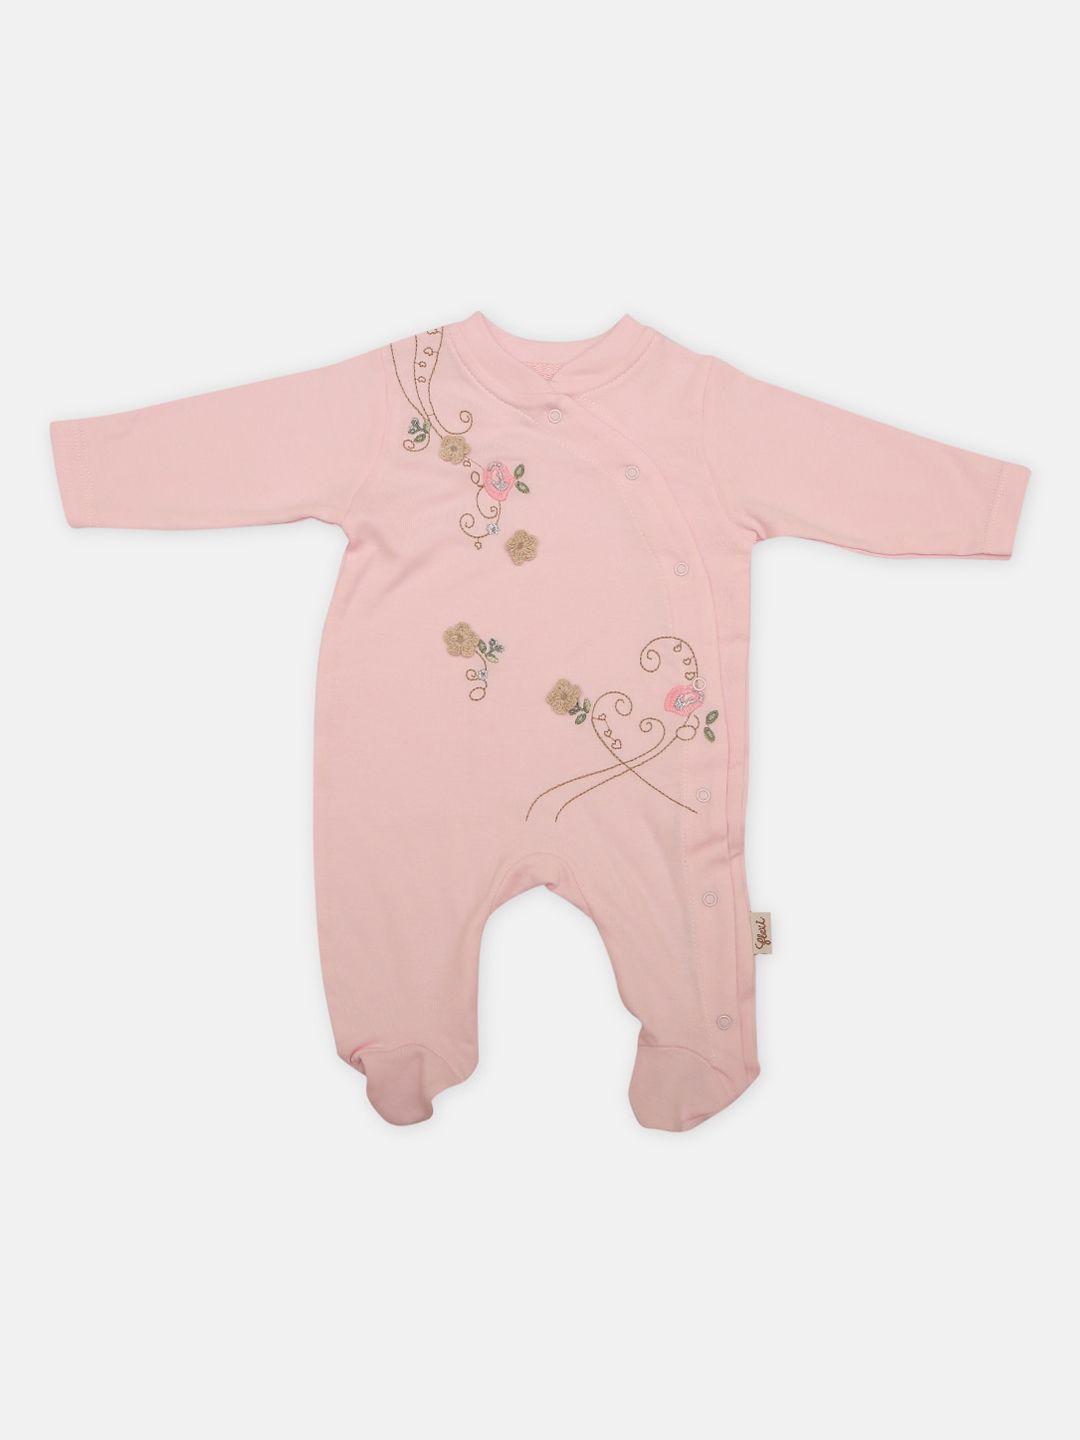 zyra kids pink embroidered romper